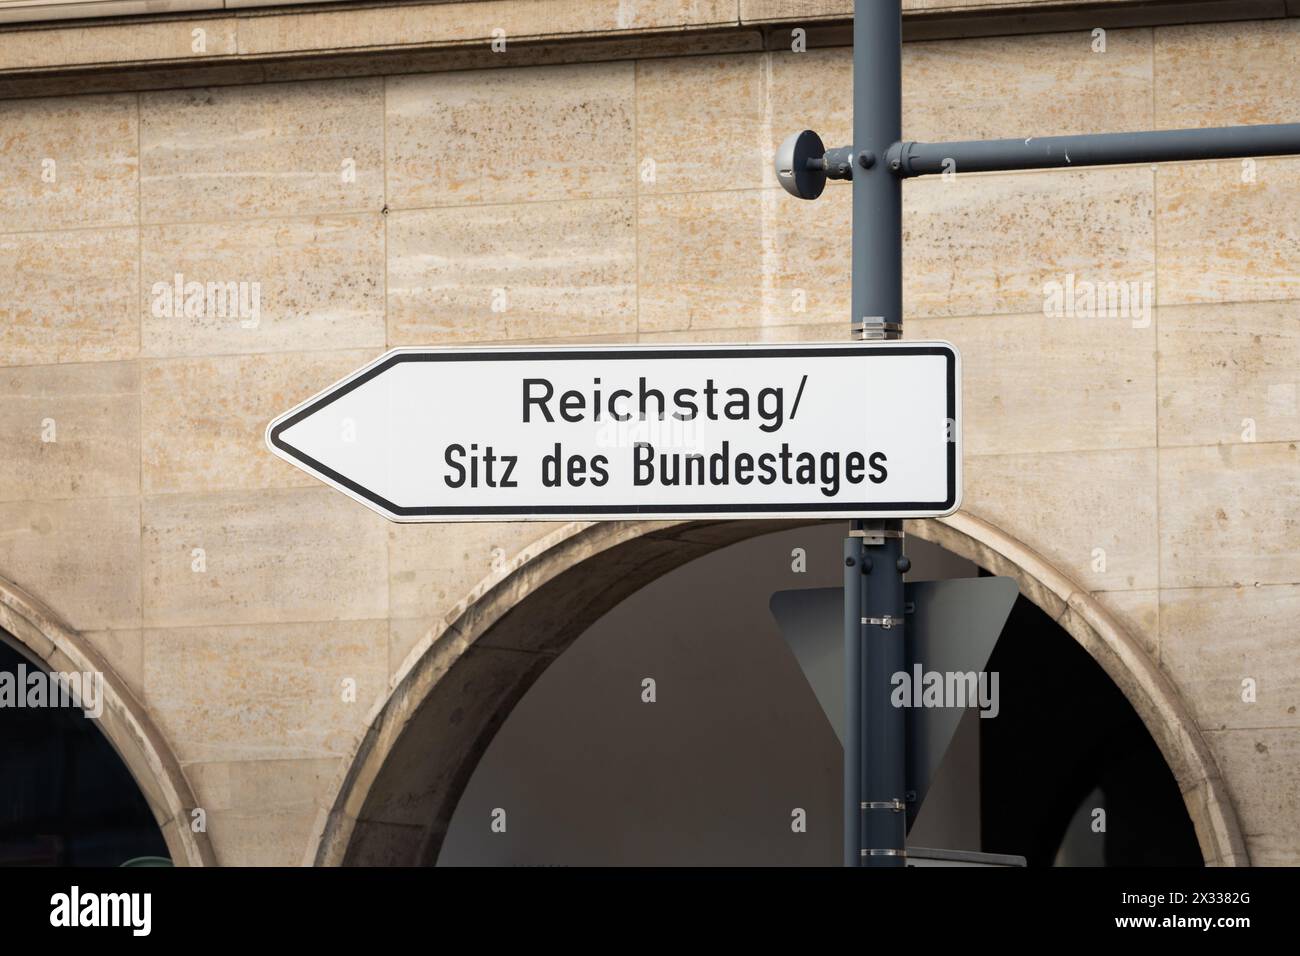 Reichstag and Sitz des Bundestages sign (German parliament). Arrow shape in the direction of the governmental buildings. Tourist attraction in Berlin. Stock Photo